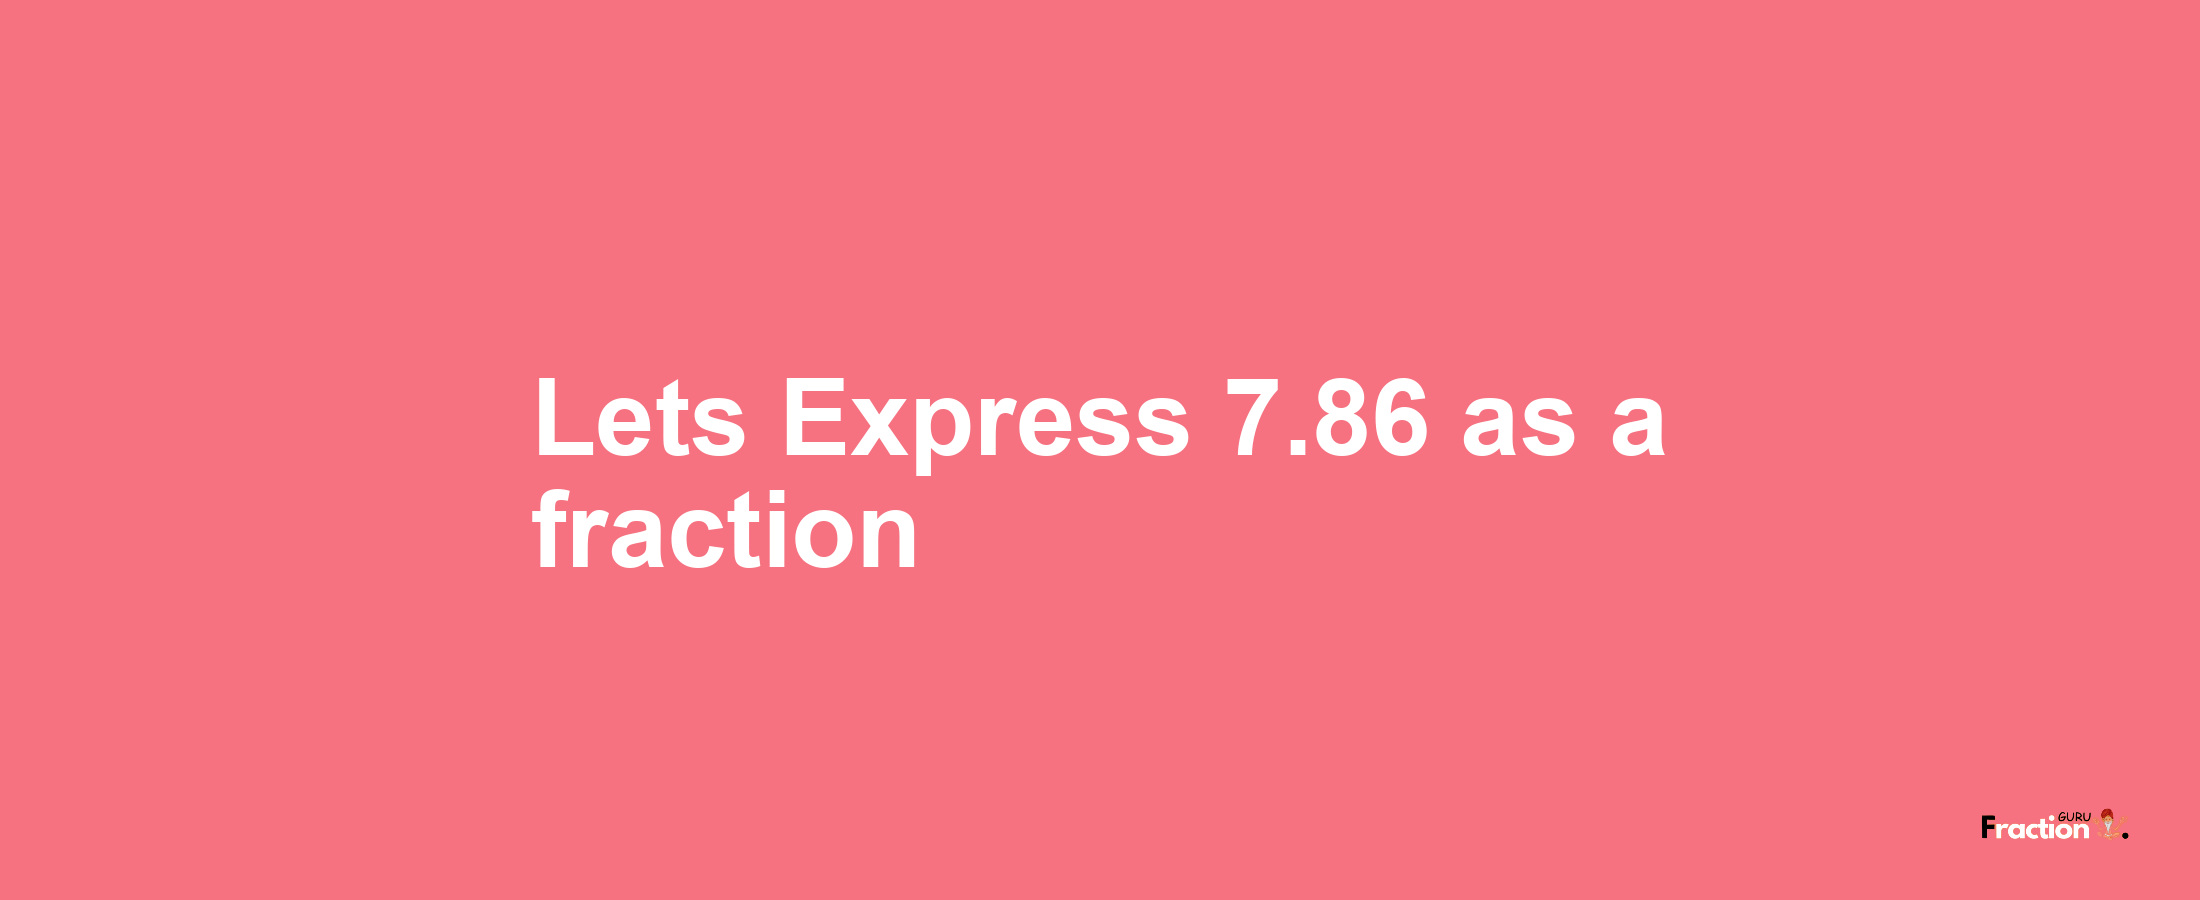 Lets Express 7.86 as afraction